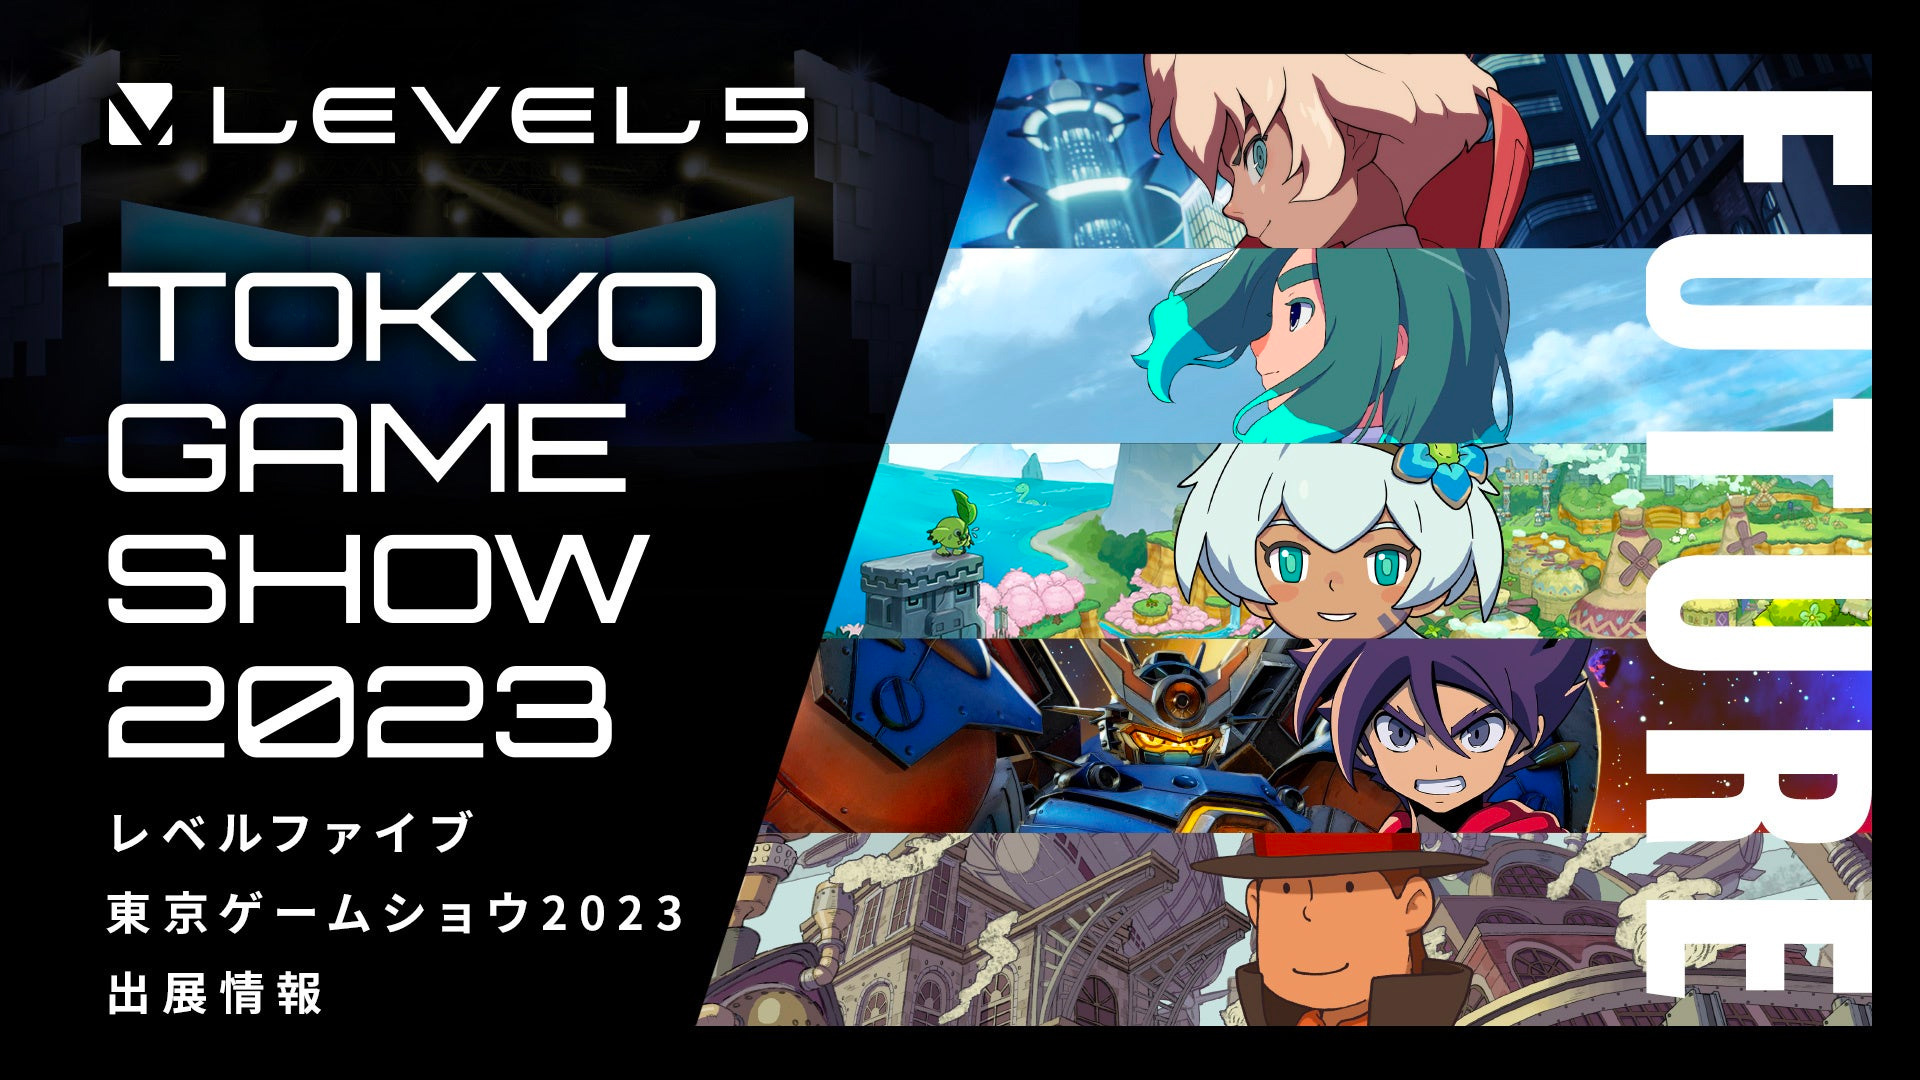 LEVEL5 All games featured at Tokyo Game Show 2023 Pledge Times